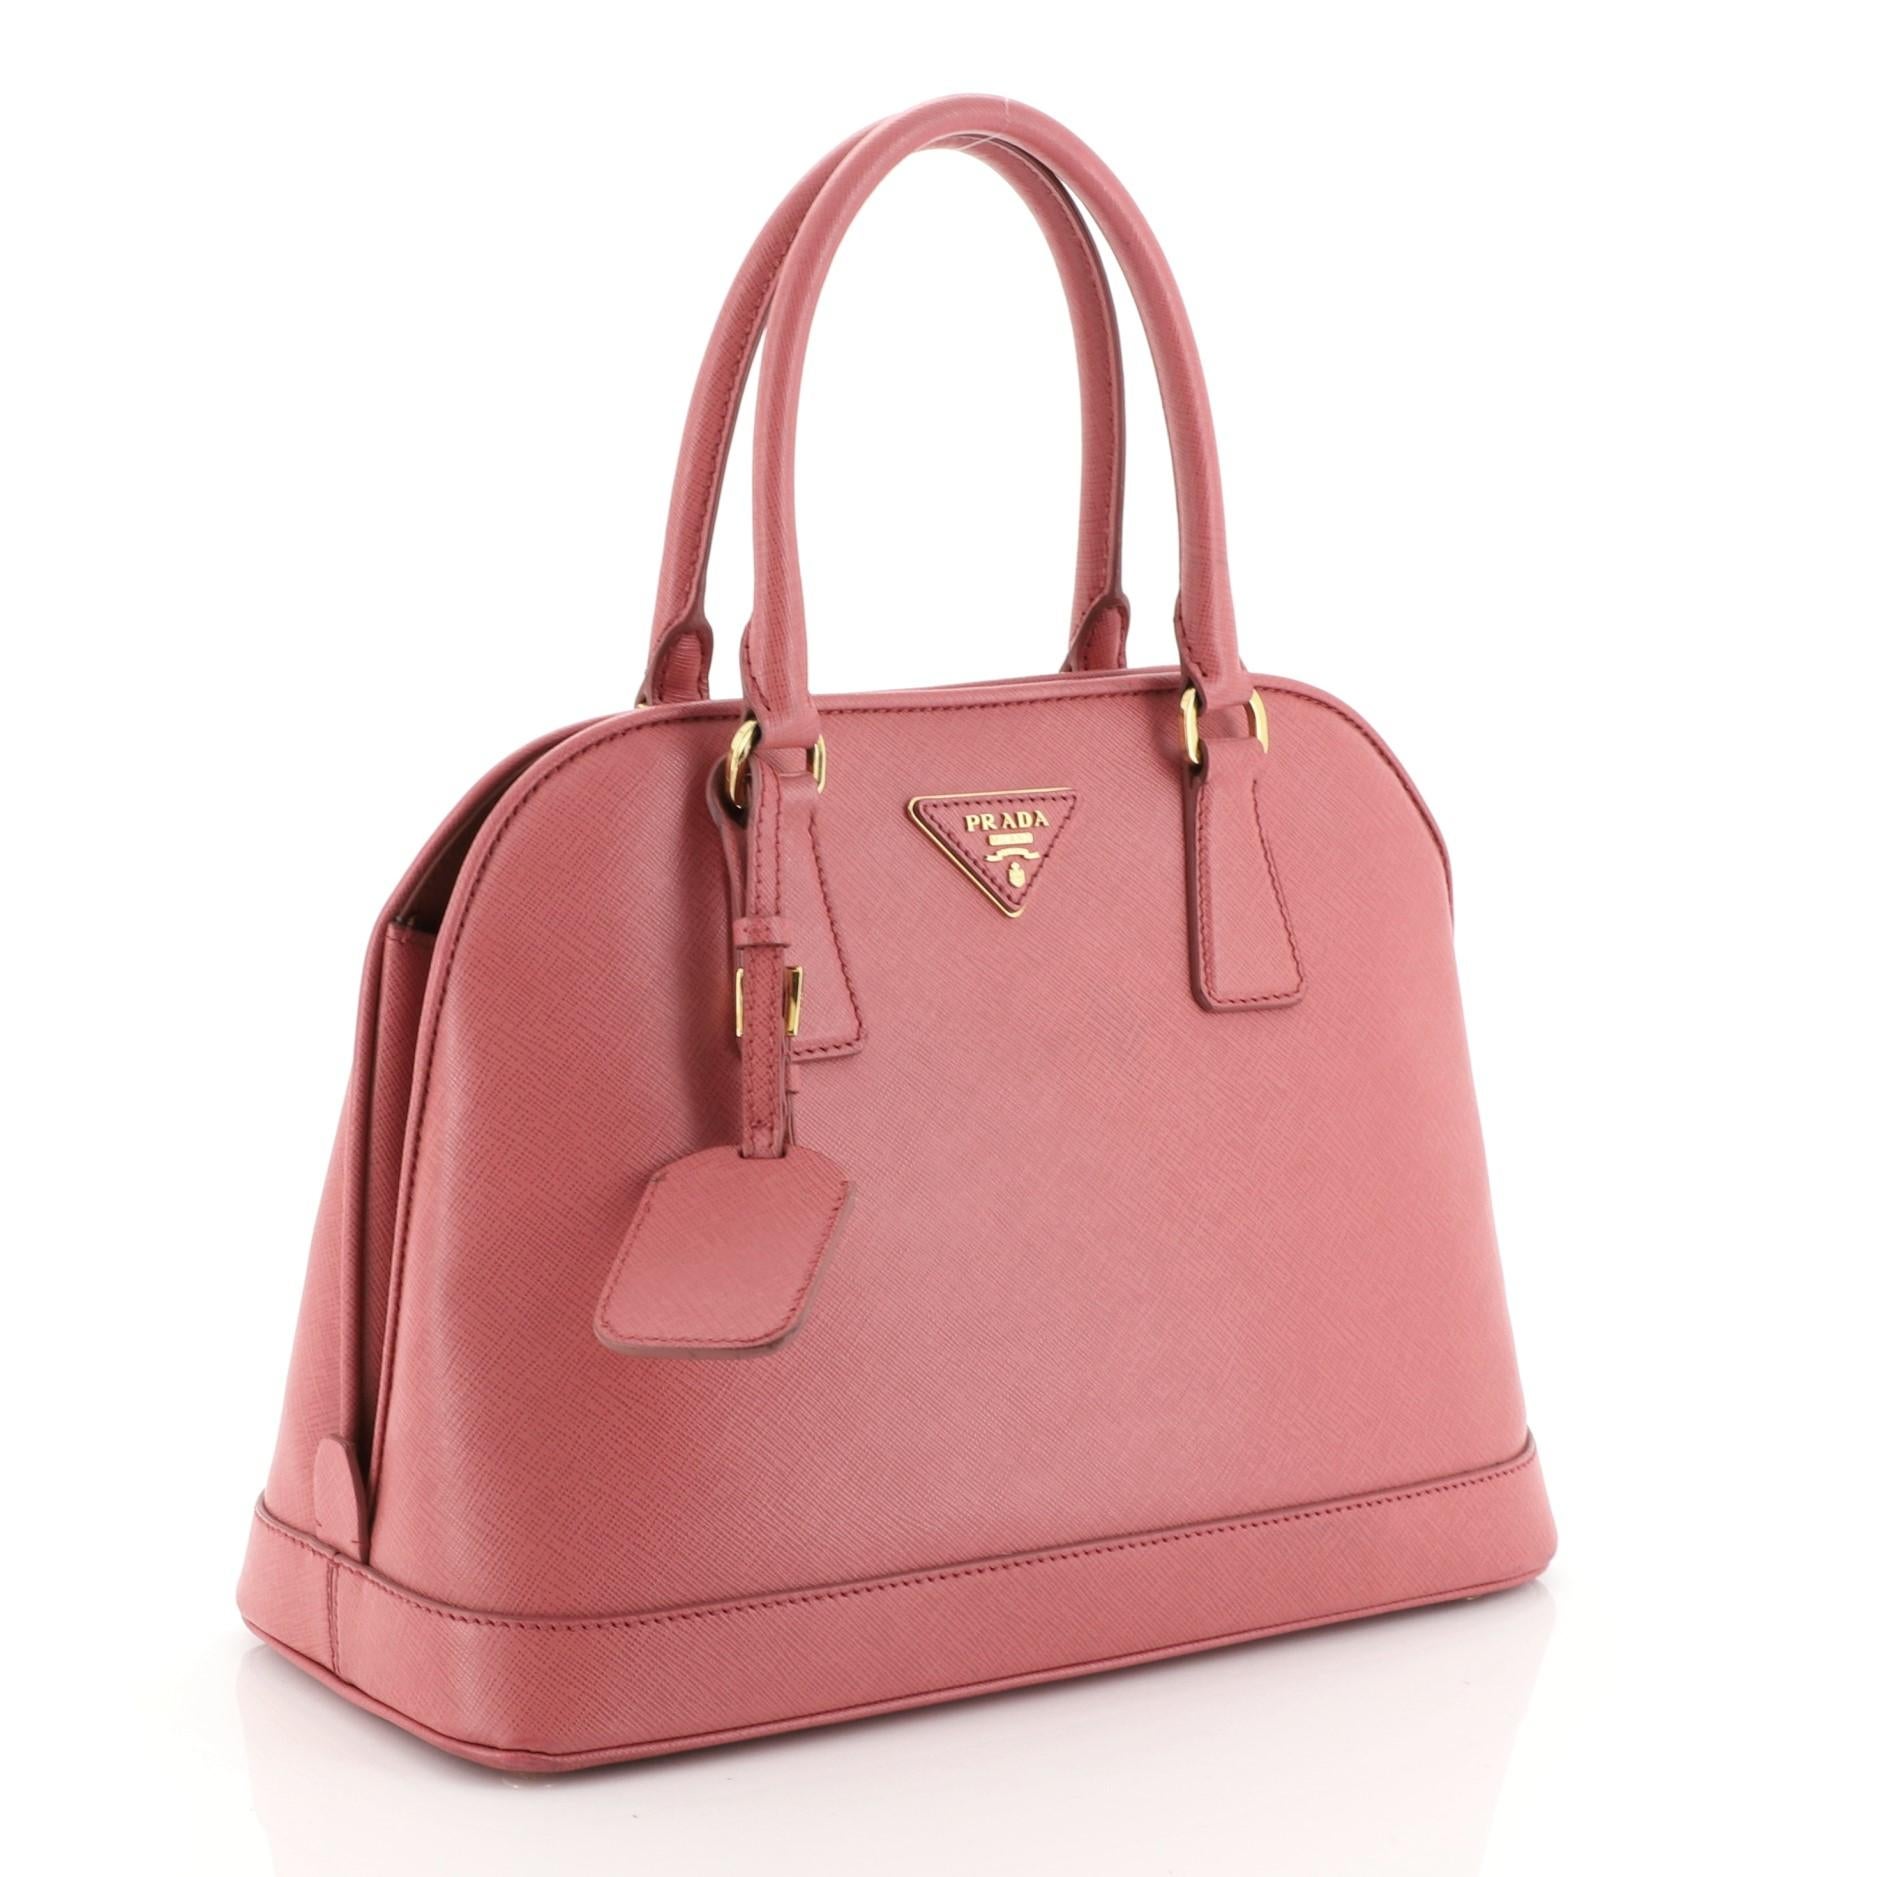 This Prada Open Promenade Bag Saffiano Leather Medium, crafted in pink saffiano leather, features dual rolled handles, protective base studs, Prada logo at the center, and gold-tone hardware. Its magnetic snap button closure opens to a pink fabric